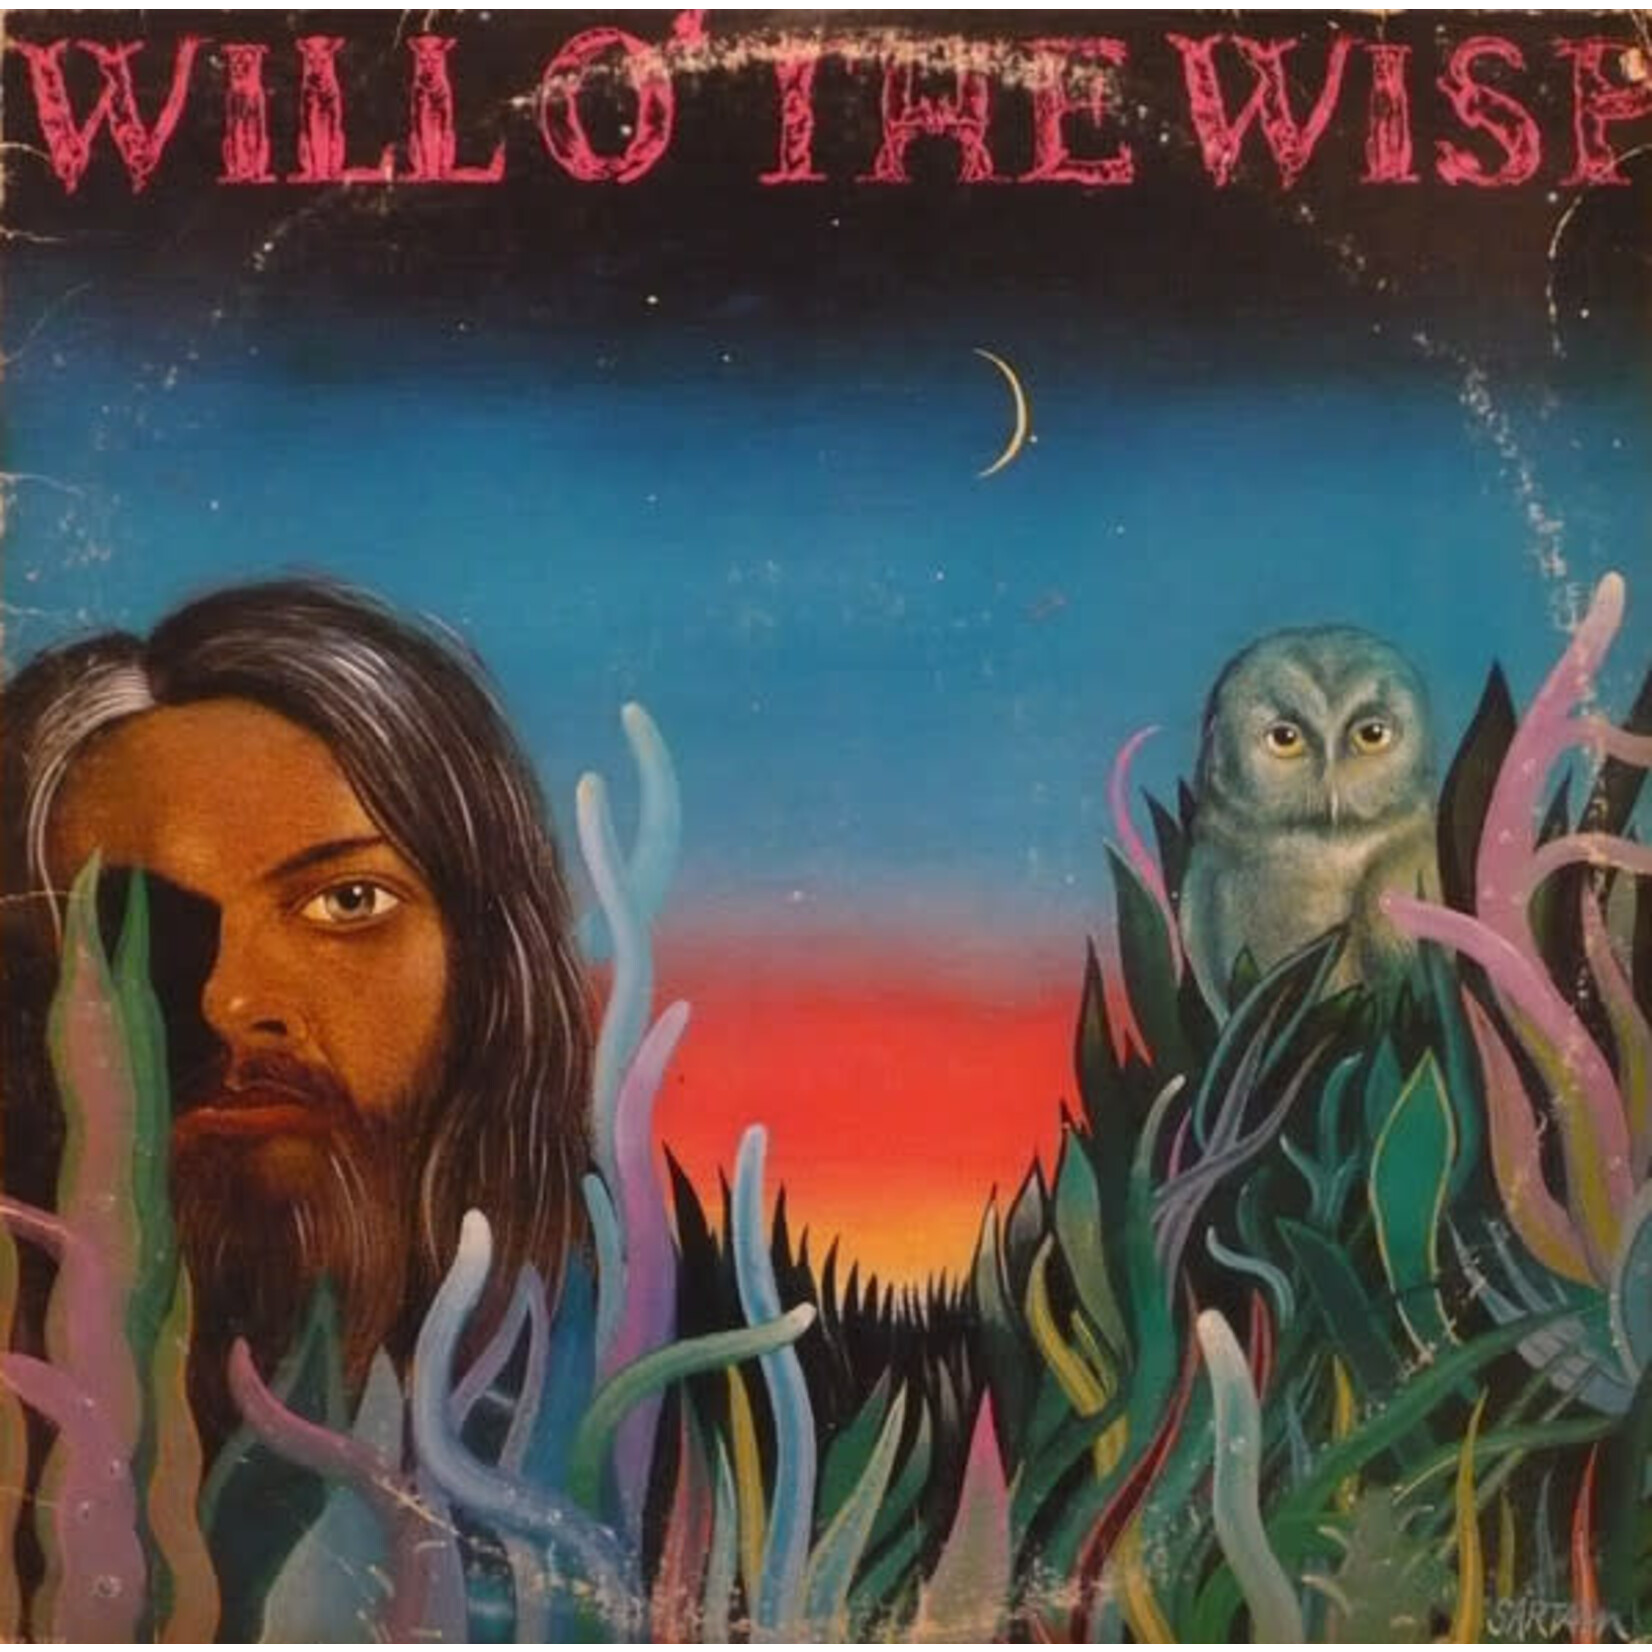 Leon Russell – Will O' The Wisp (G+, 1975, LP, Shelter Records – SR-2138)